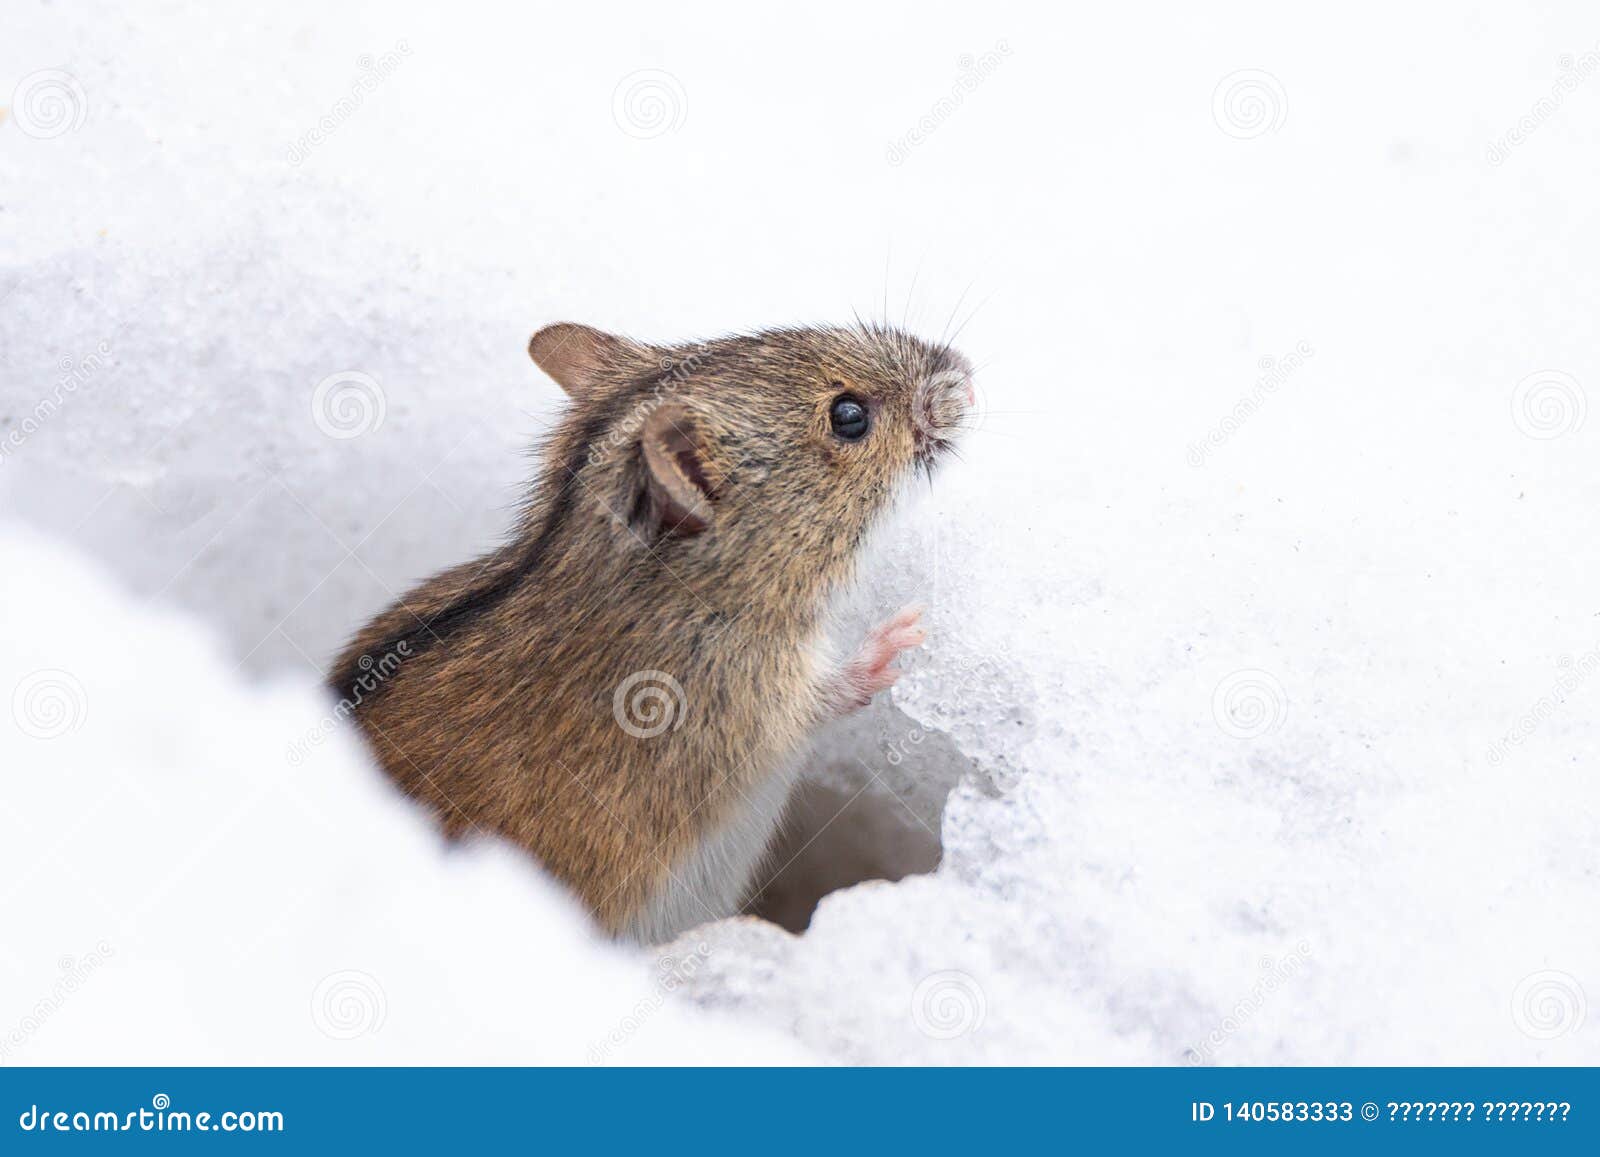 Mouse snow winter stock image. Image of europe, bright - 140583333